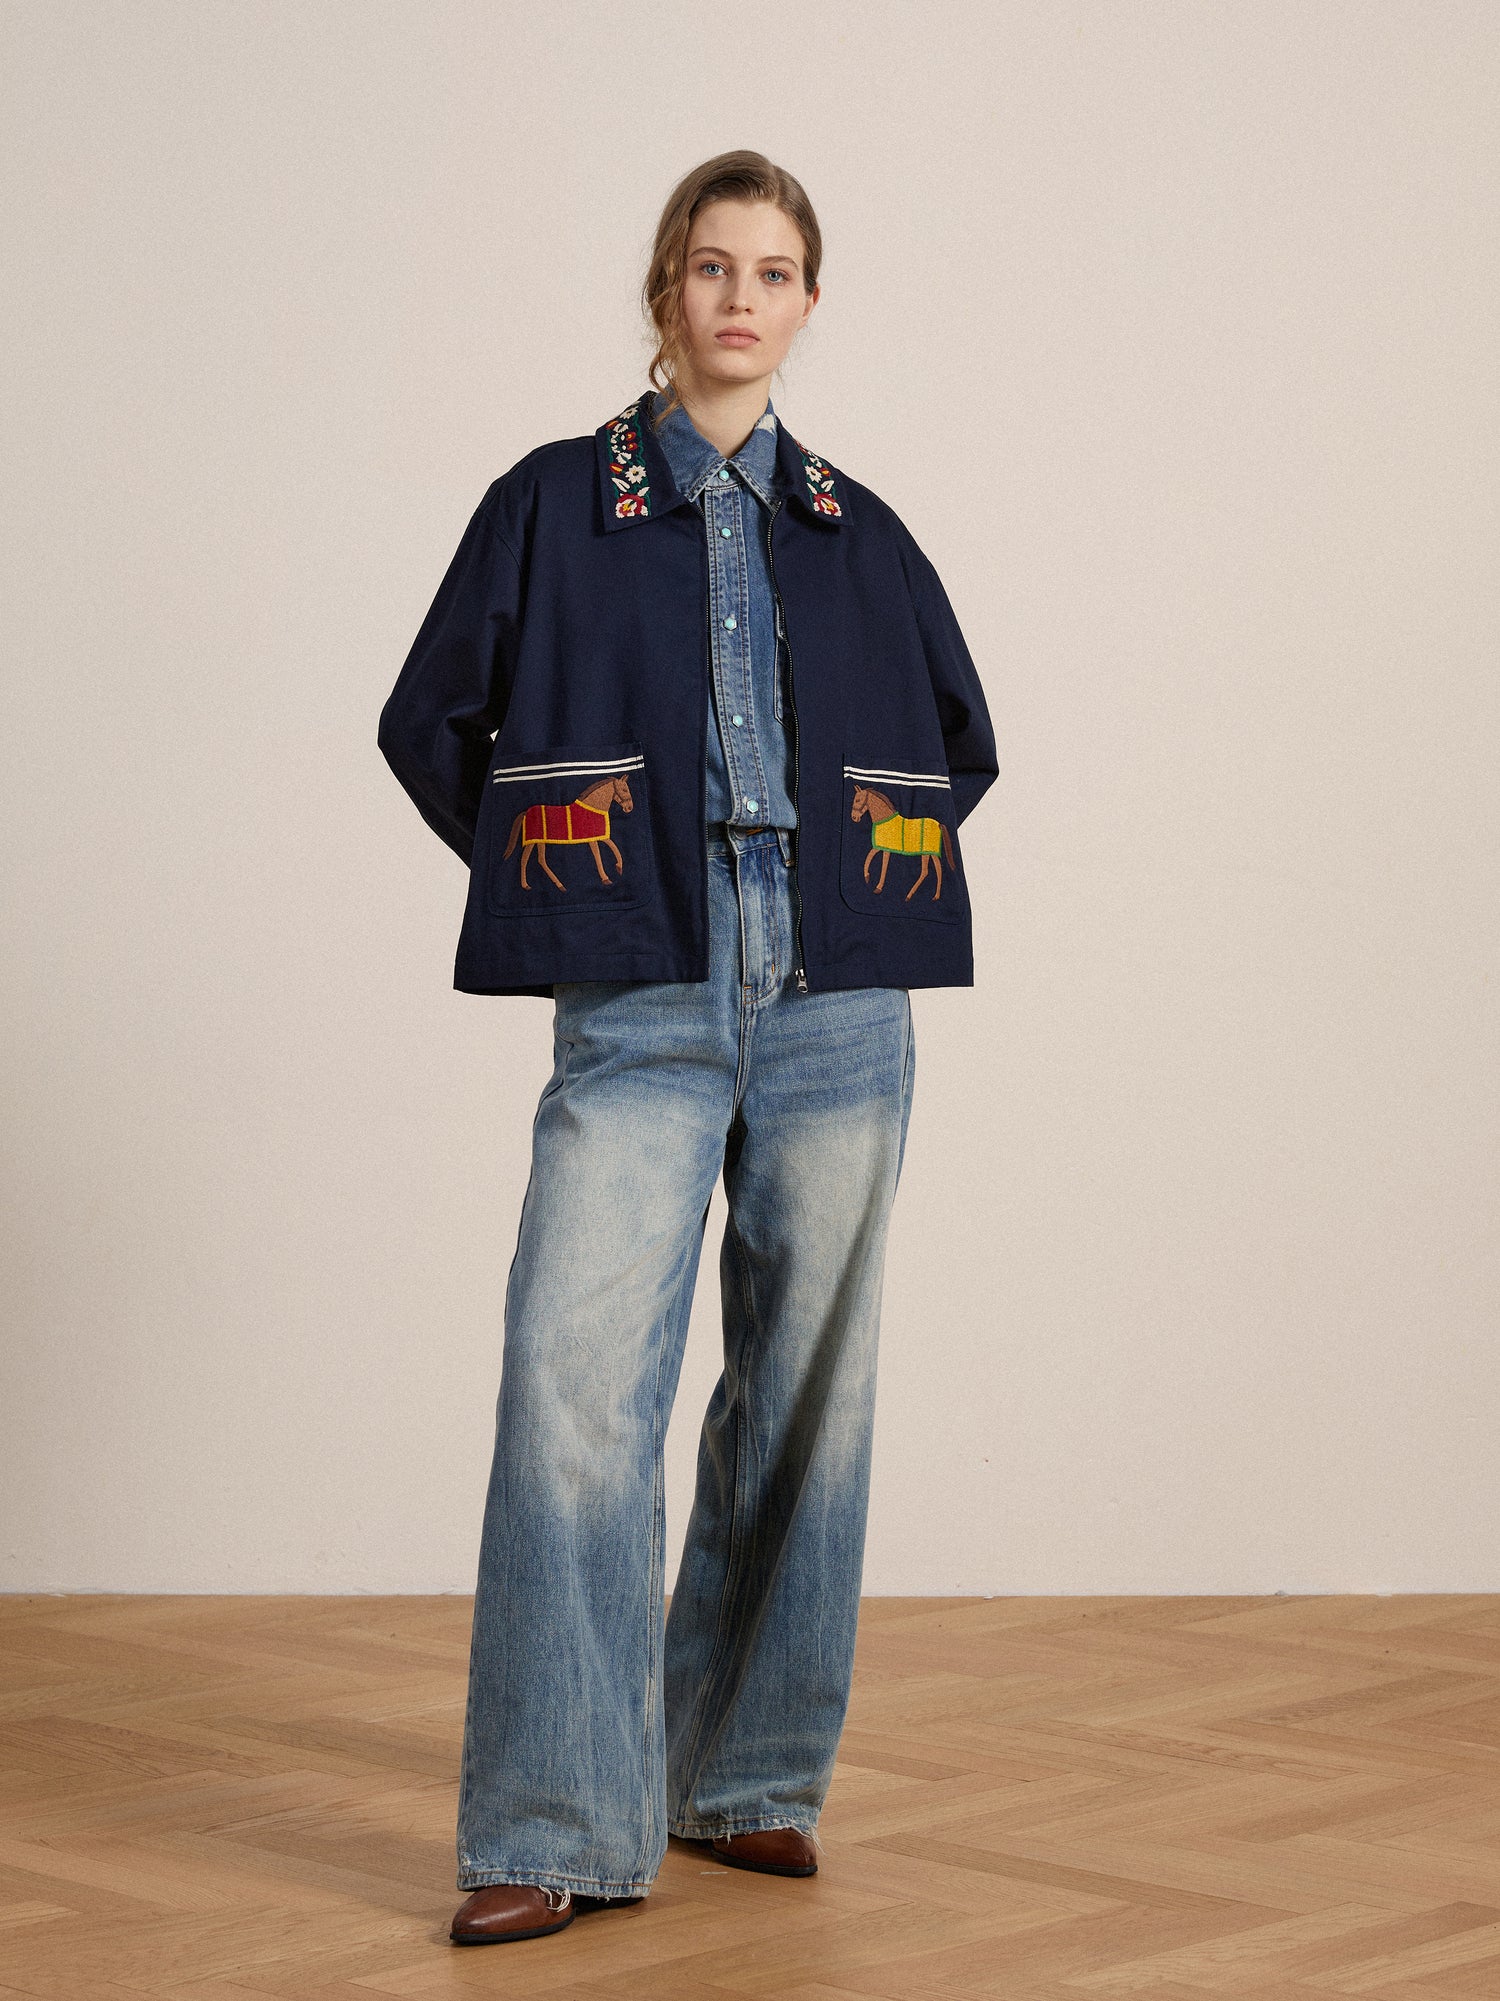 A woman wearing a denim shirt under a Found Horse Equine Work Jacket with detailed embroidery and wide-leg jeans stands in a neutral-toned room.